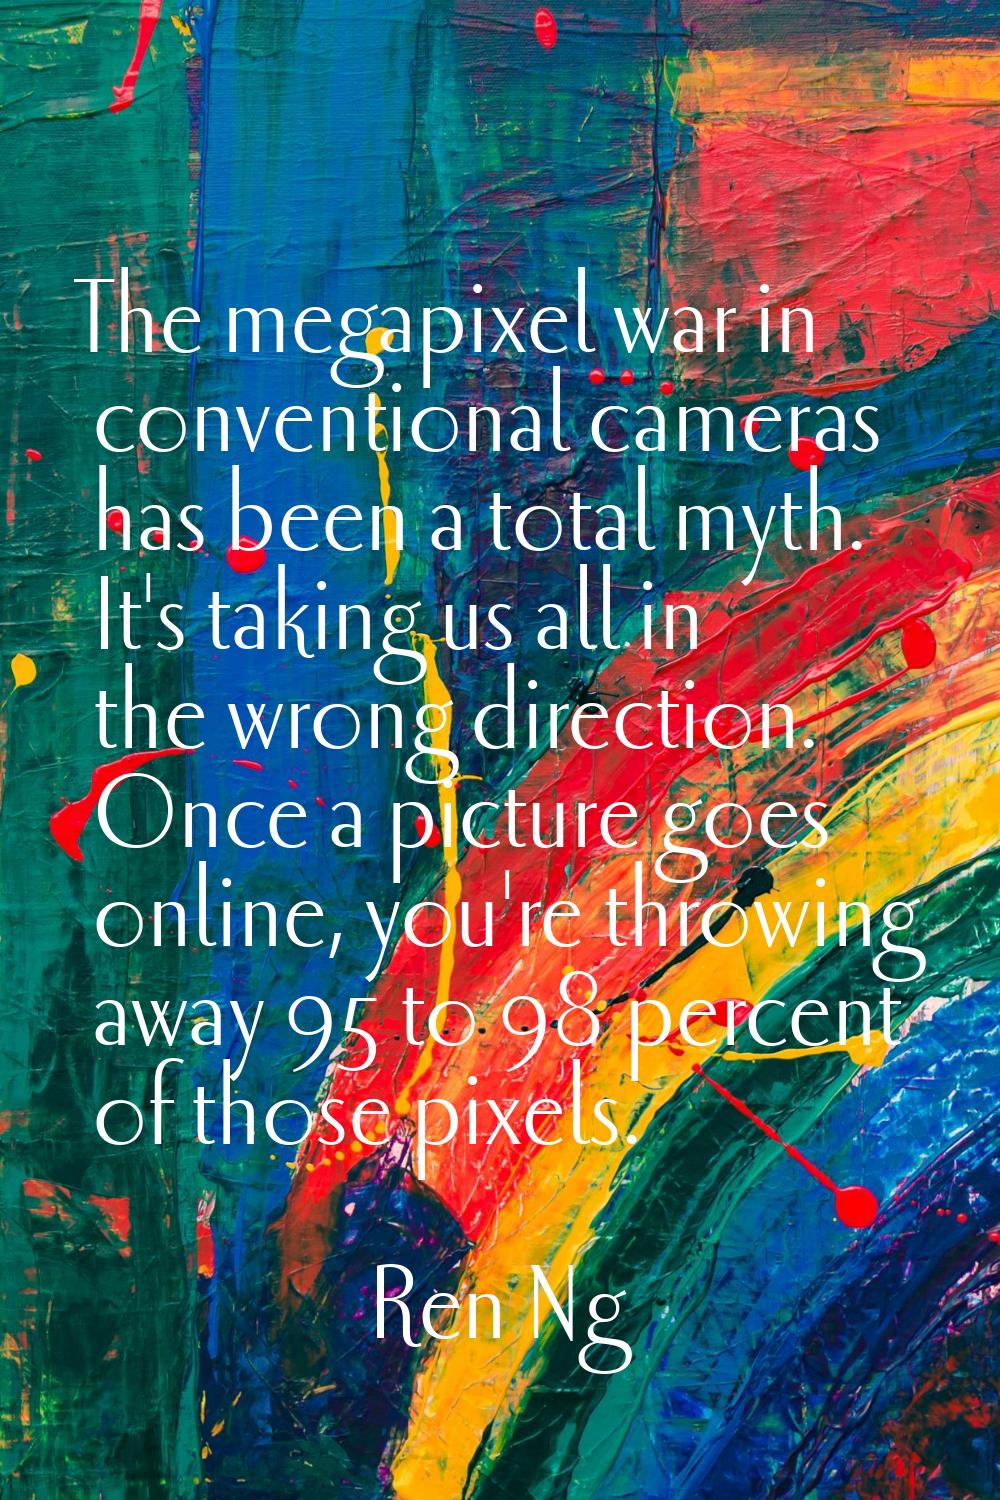 The megapixel war in conventional cameras has been a total myth. It's taking us all in the wrong di